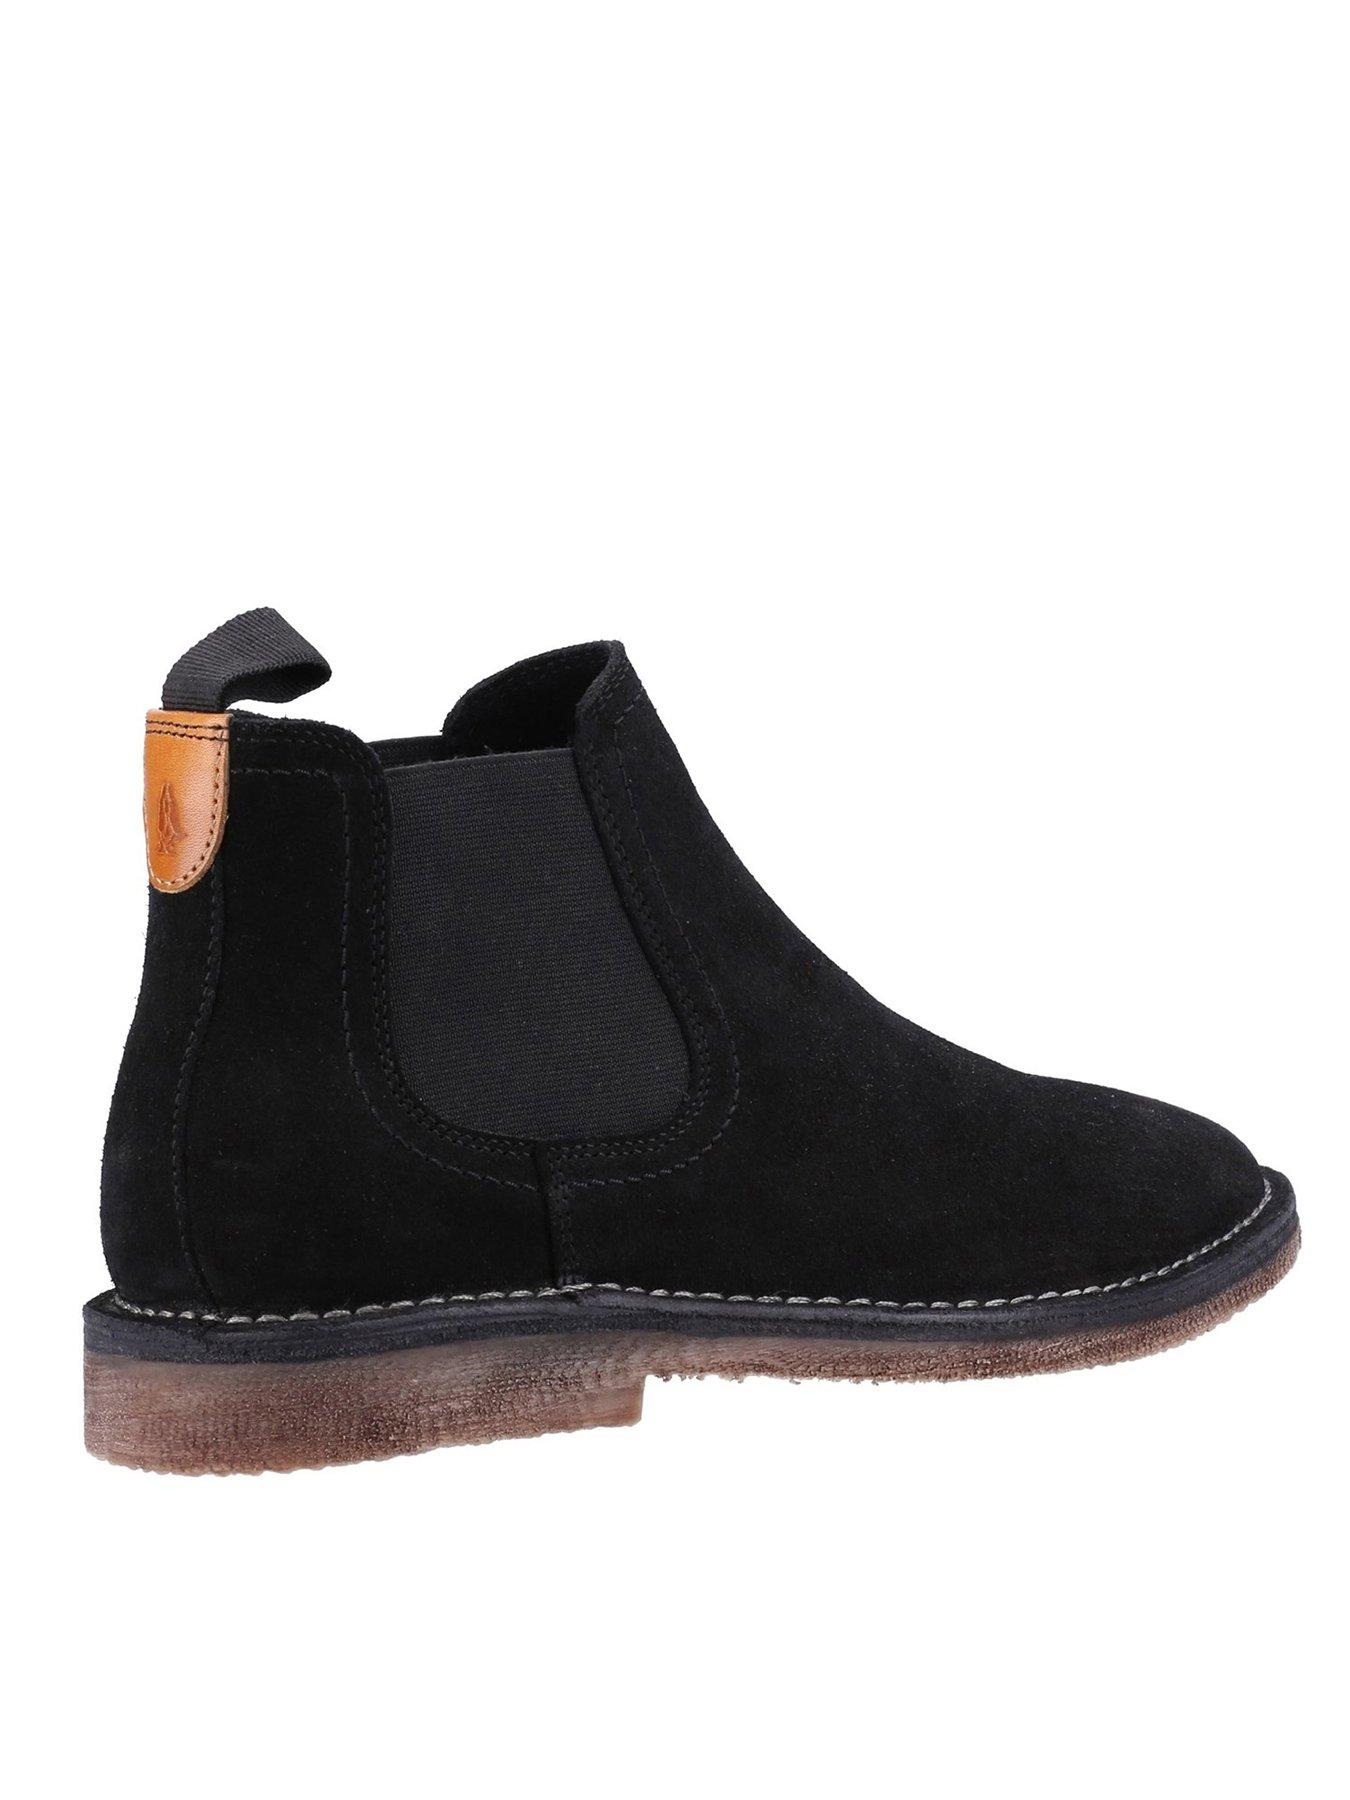 Hush Puppies Shaun Suede Chelsea Boots - Black | very.co.uk